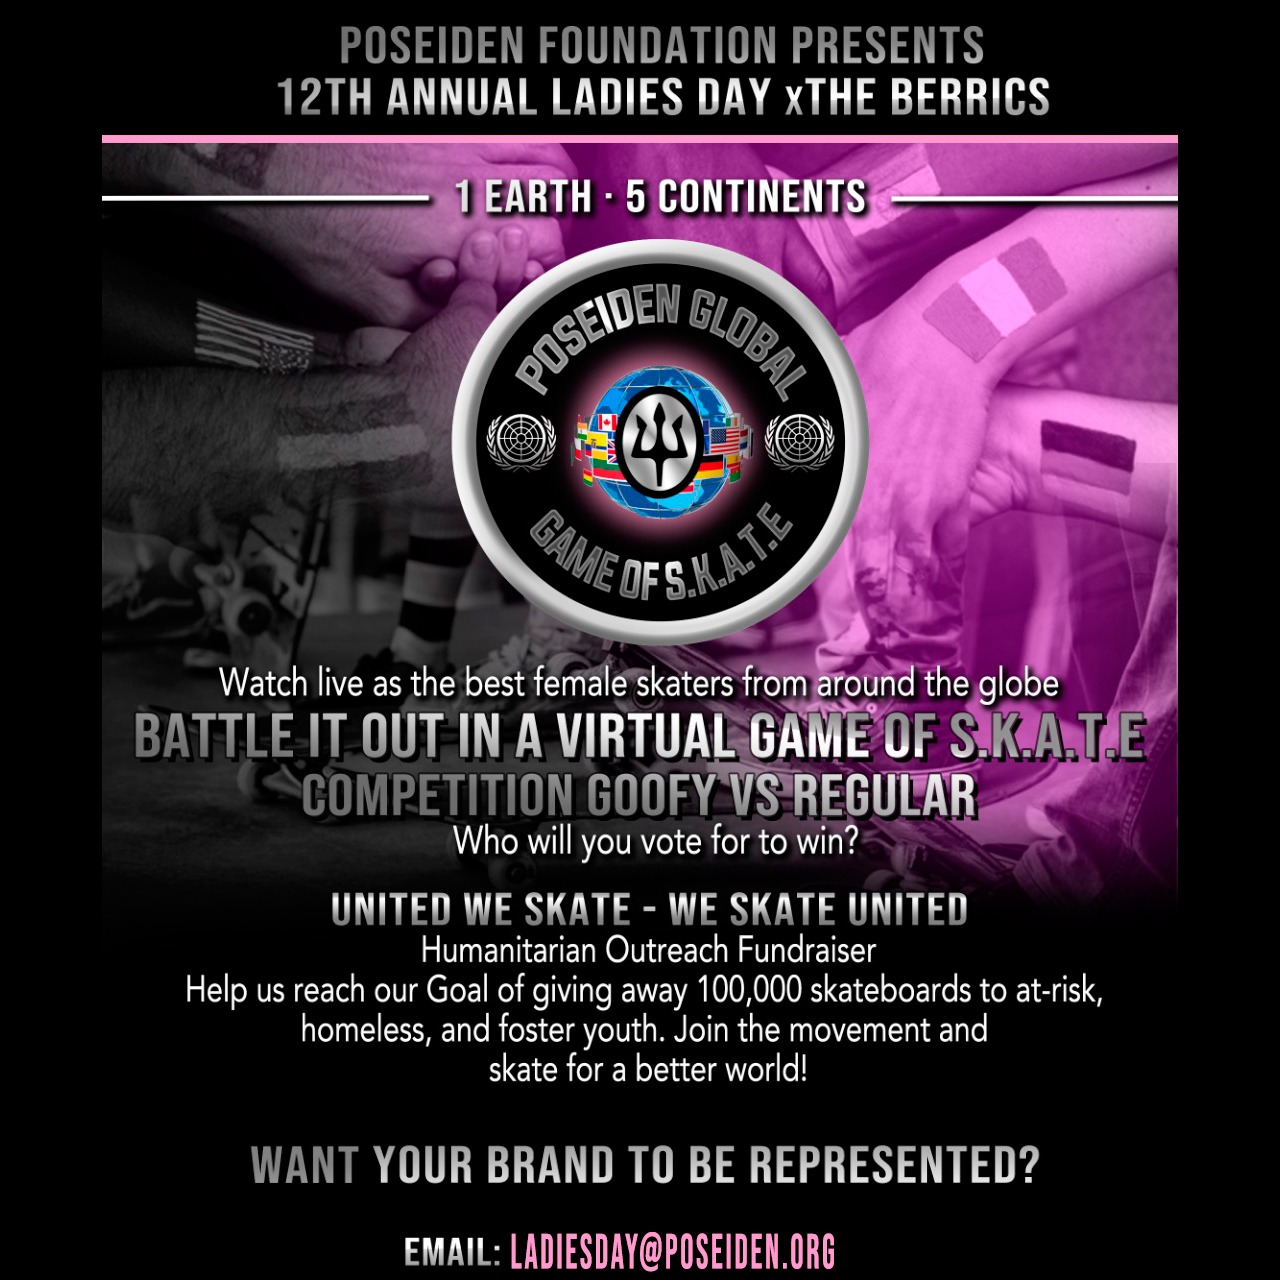 Poseiden Foundation Announces Global Game Of S.K.A.T.E. & 12th Annual 'Ladies Day'